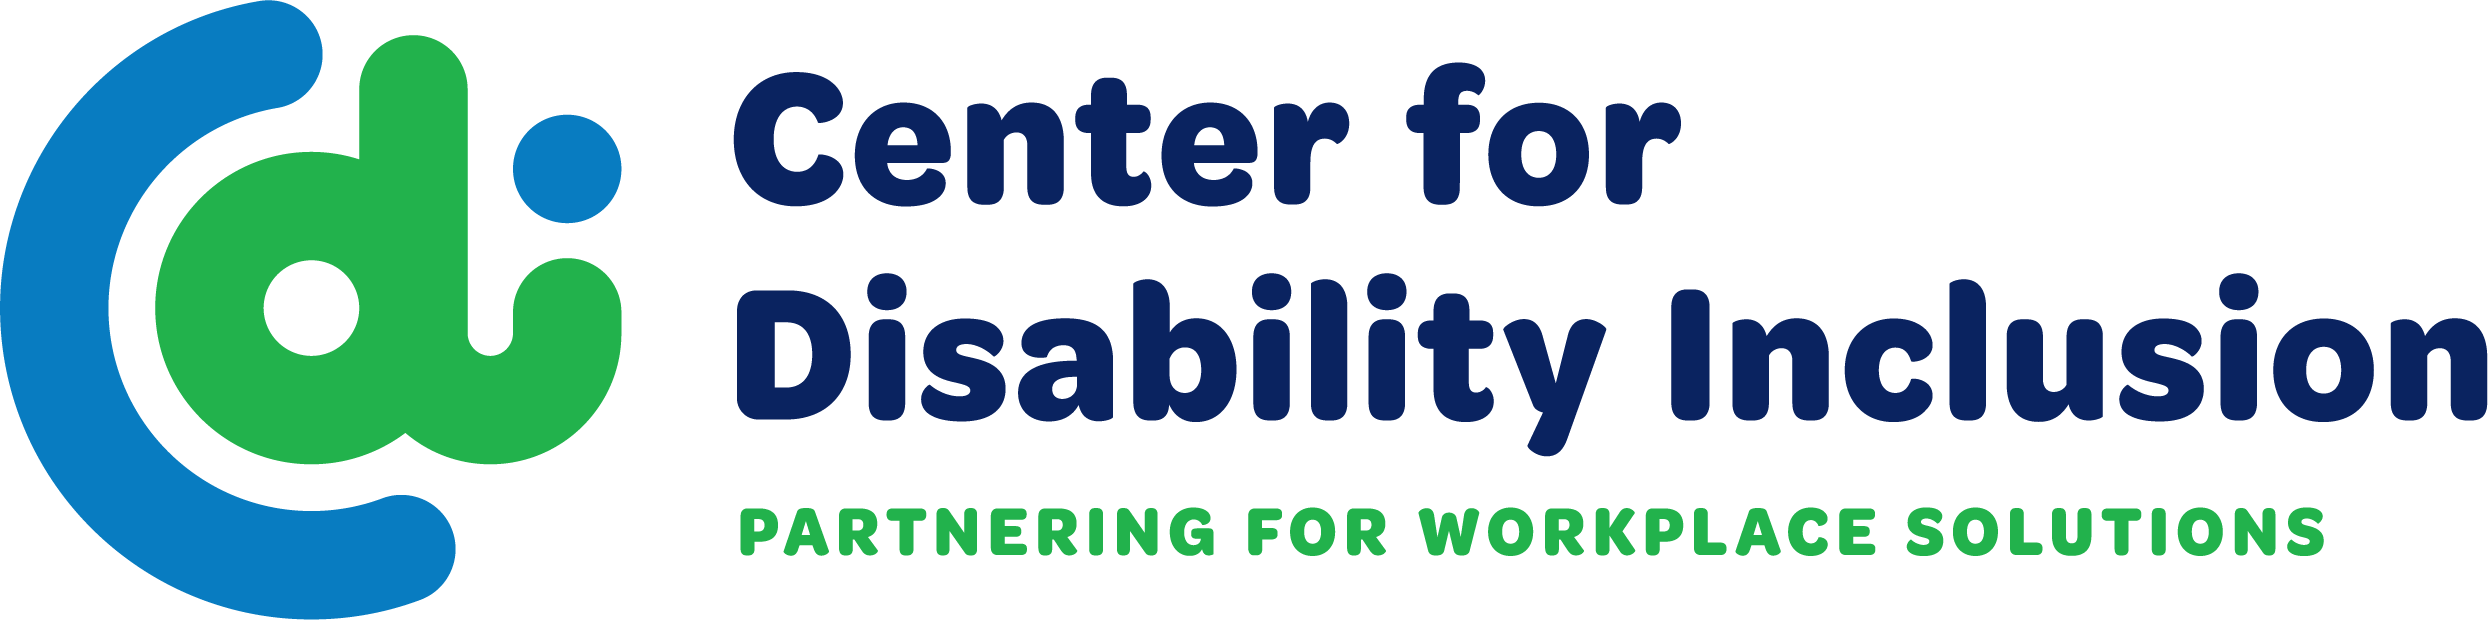 Center for Disability Inclusion